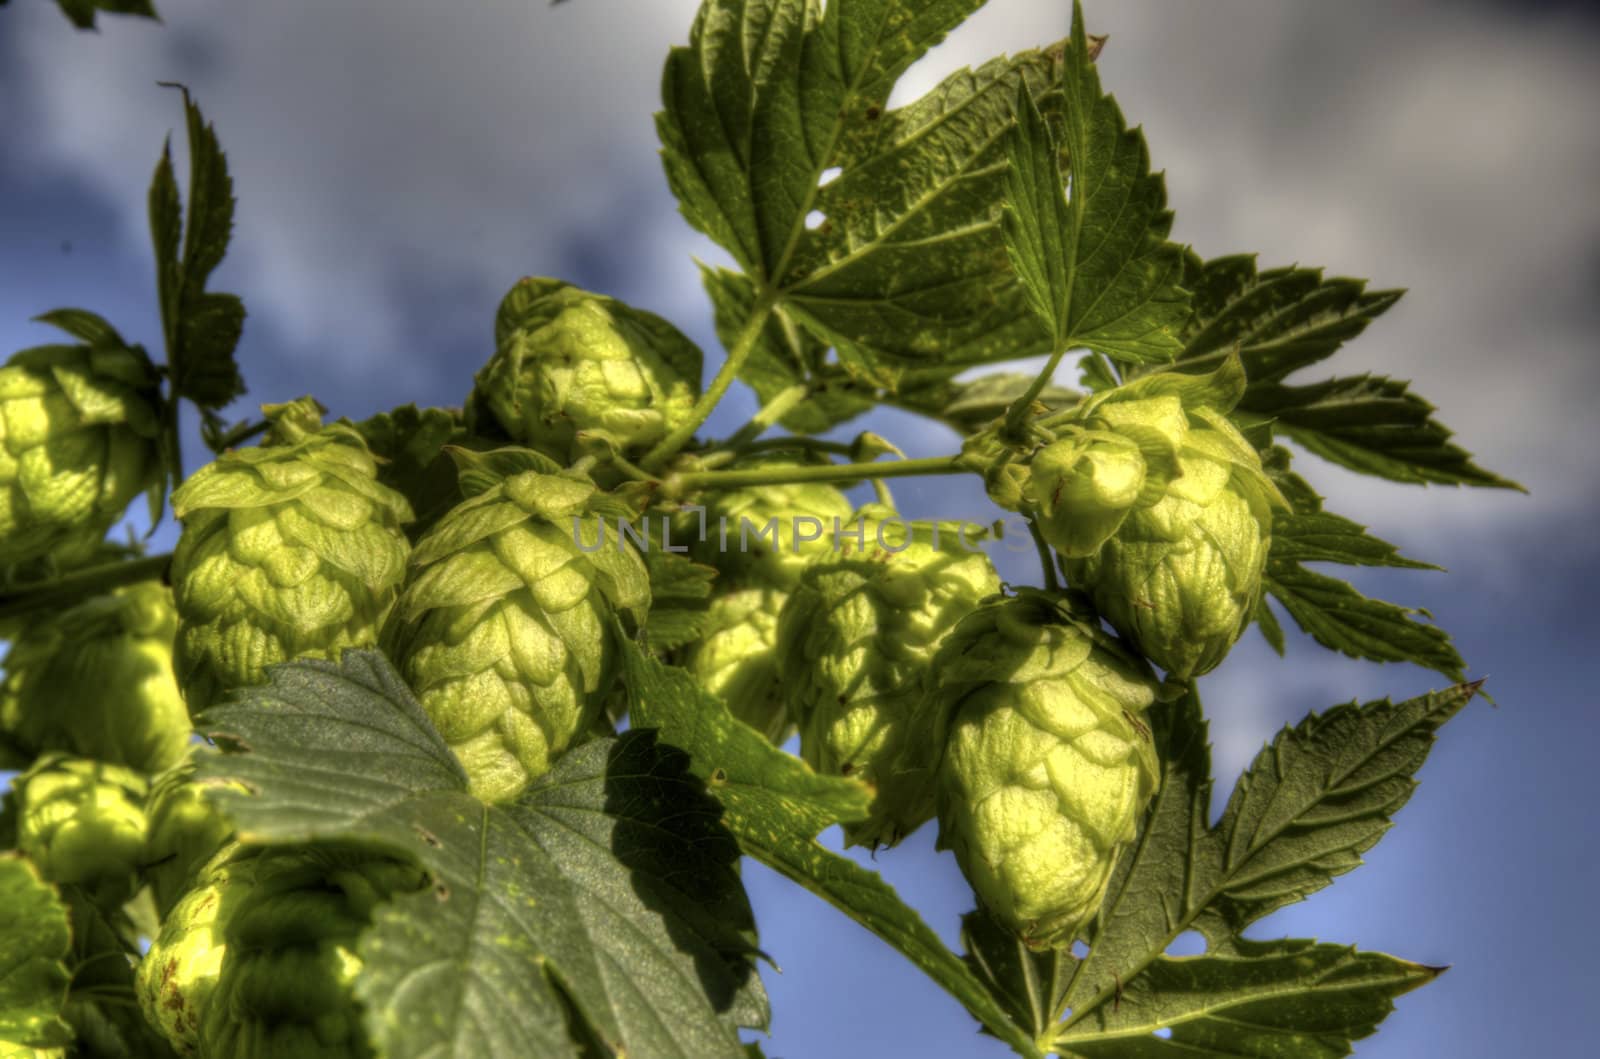 The photo shows the construction and the hop plant HDR.